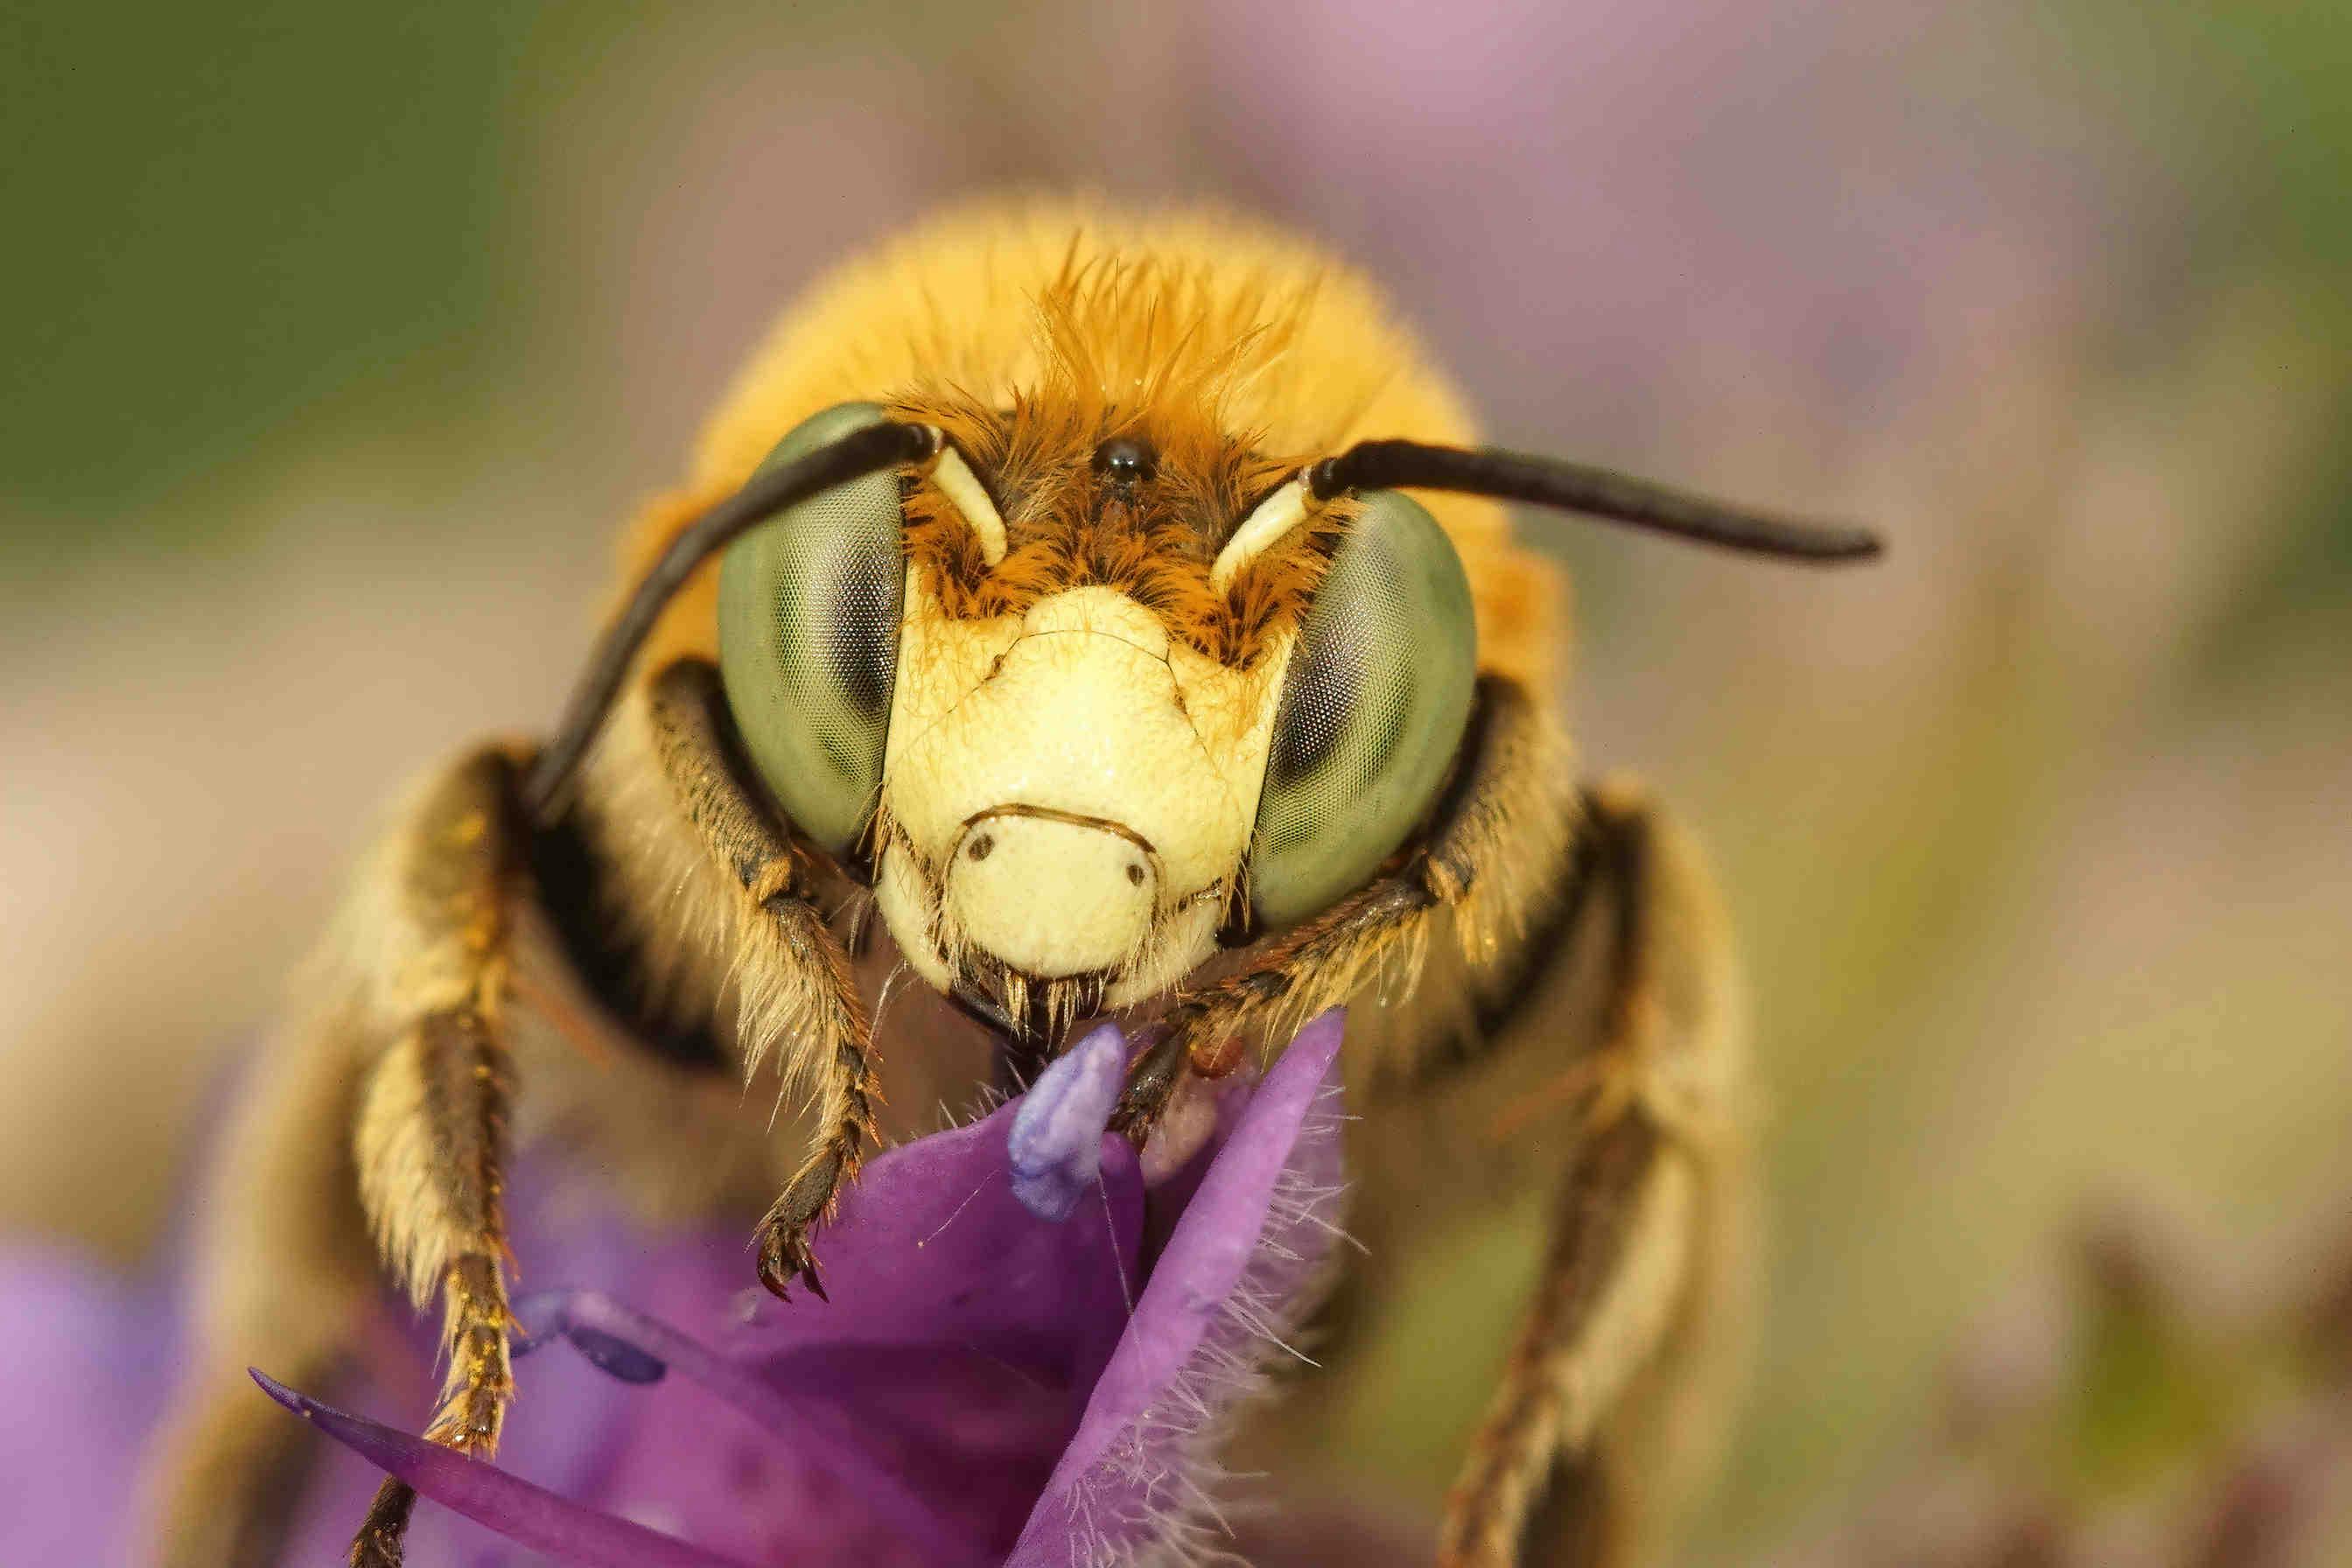 What colours do bees see?